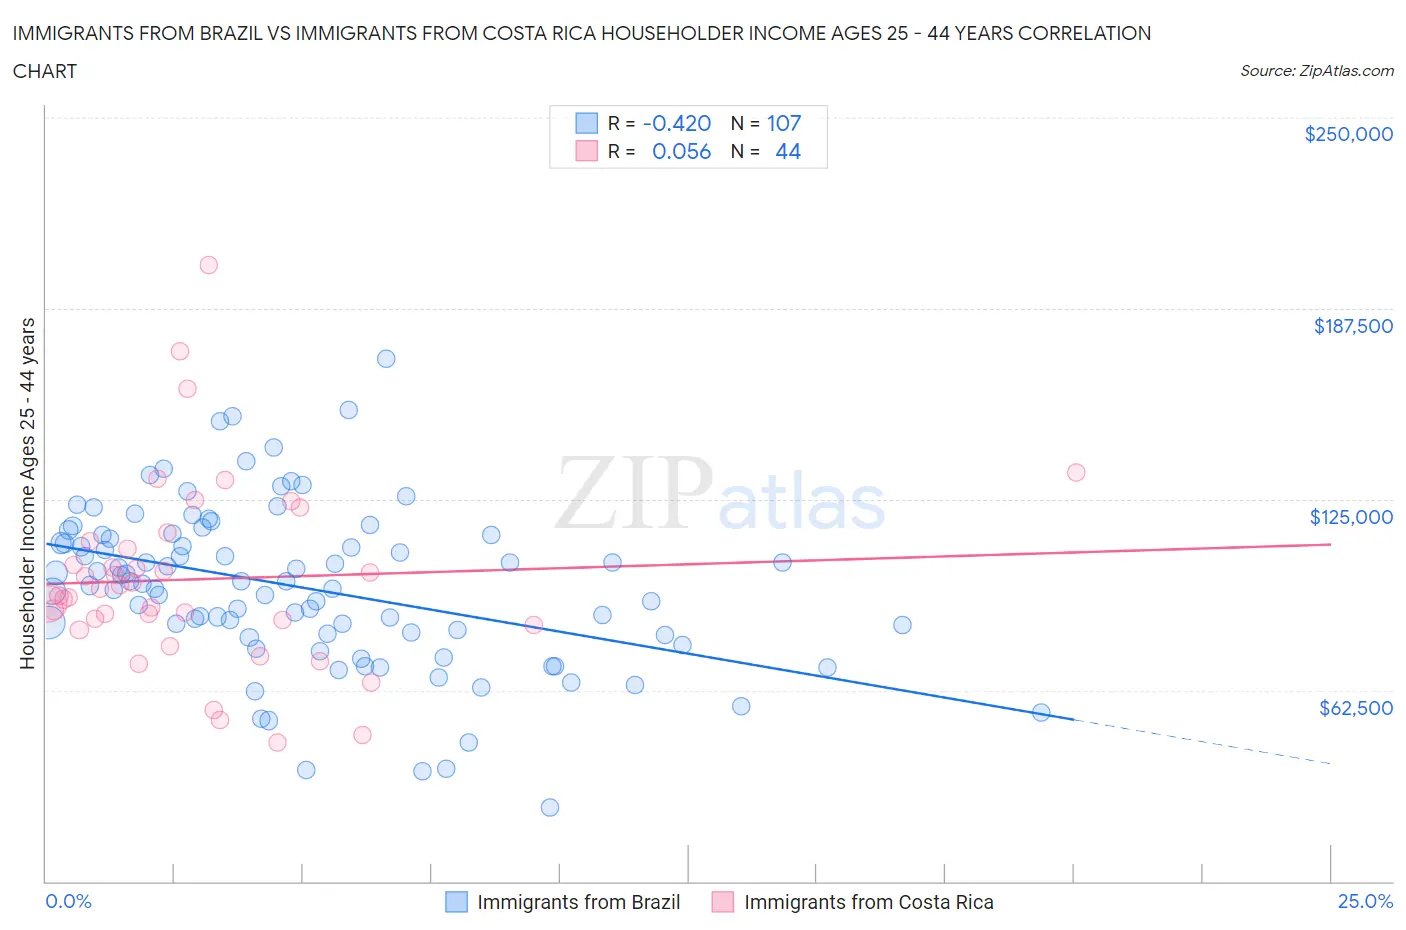 Immigrants from Brazil vs Immigrants from Costa Rica Householder Income Ages 25 - 44 years